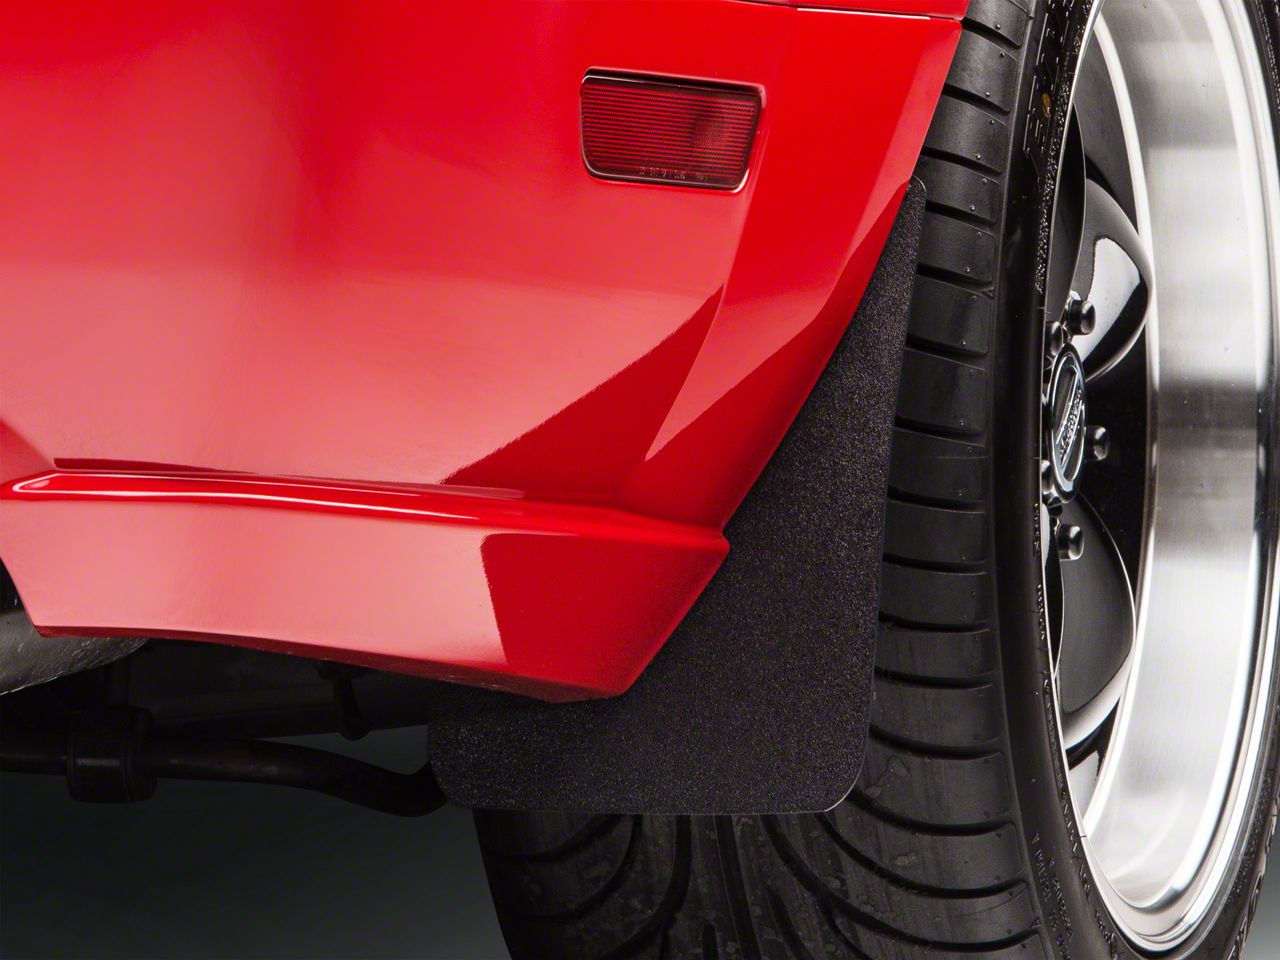 2008 Ford mustang mud flaps #2